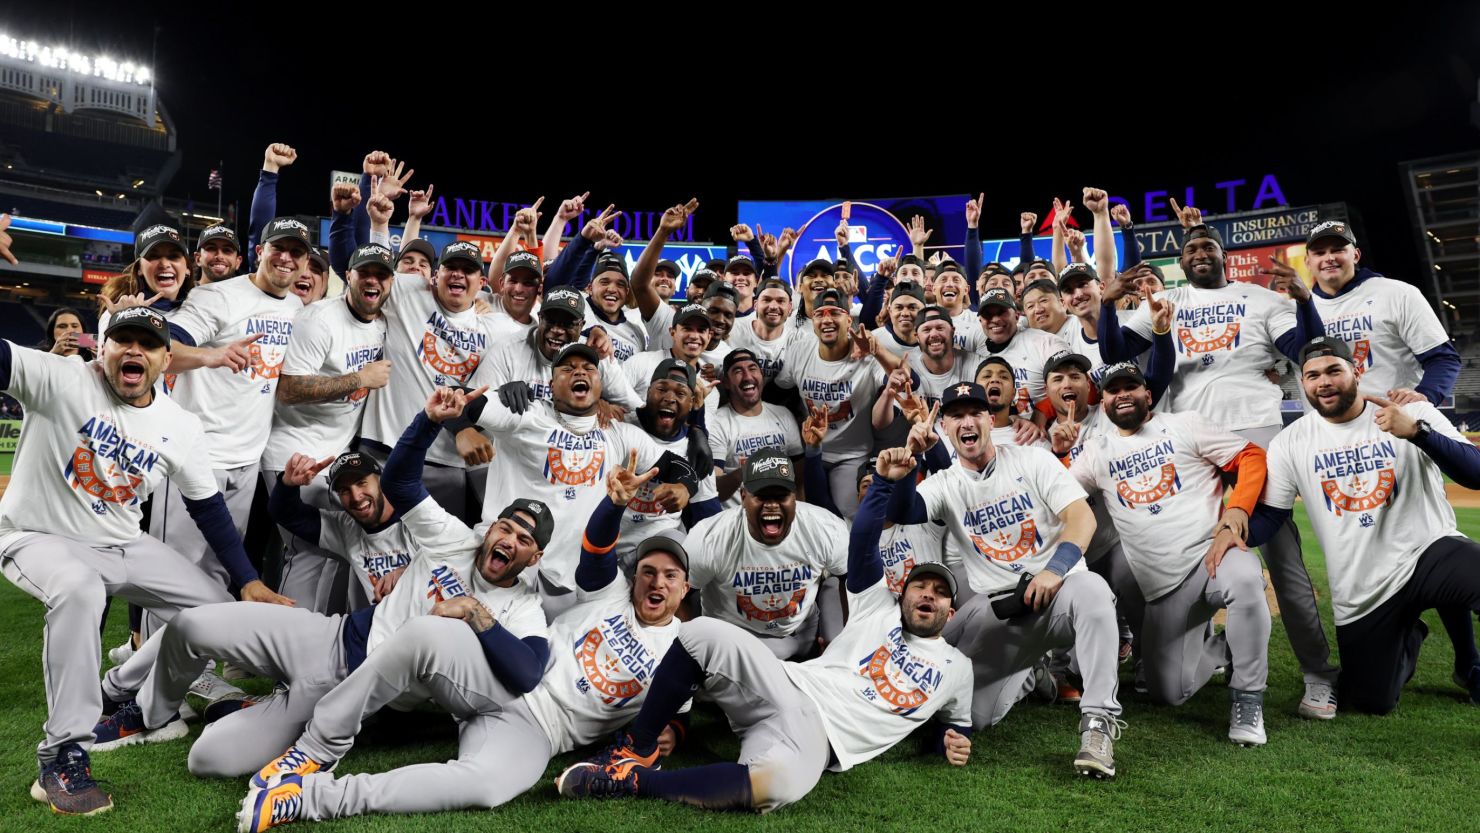 Members of the Houston Astros pose for a photo on the field after defeating the New York Yankees at Yankee Stadium on Sunday, October 23, 2022.